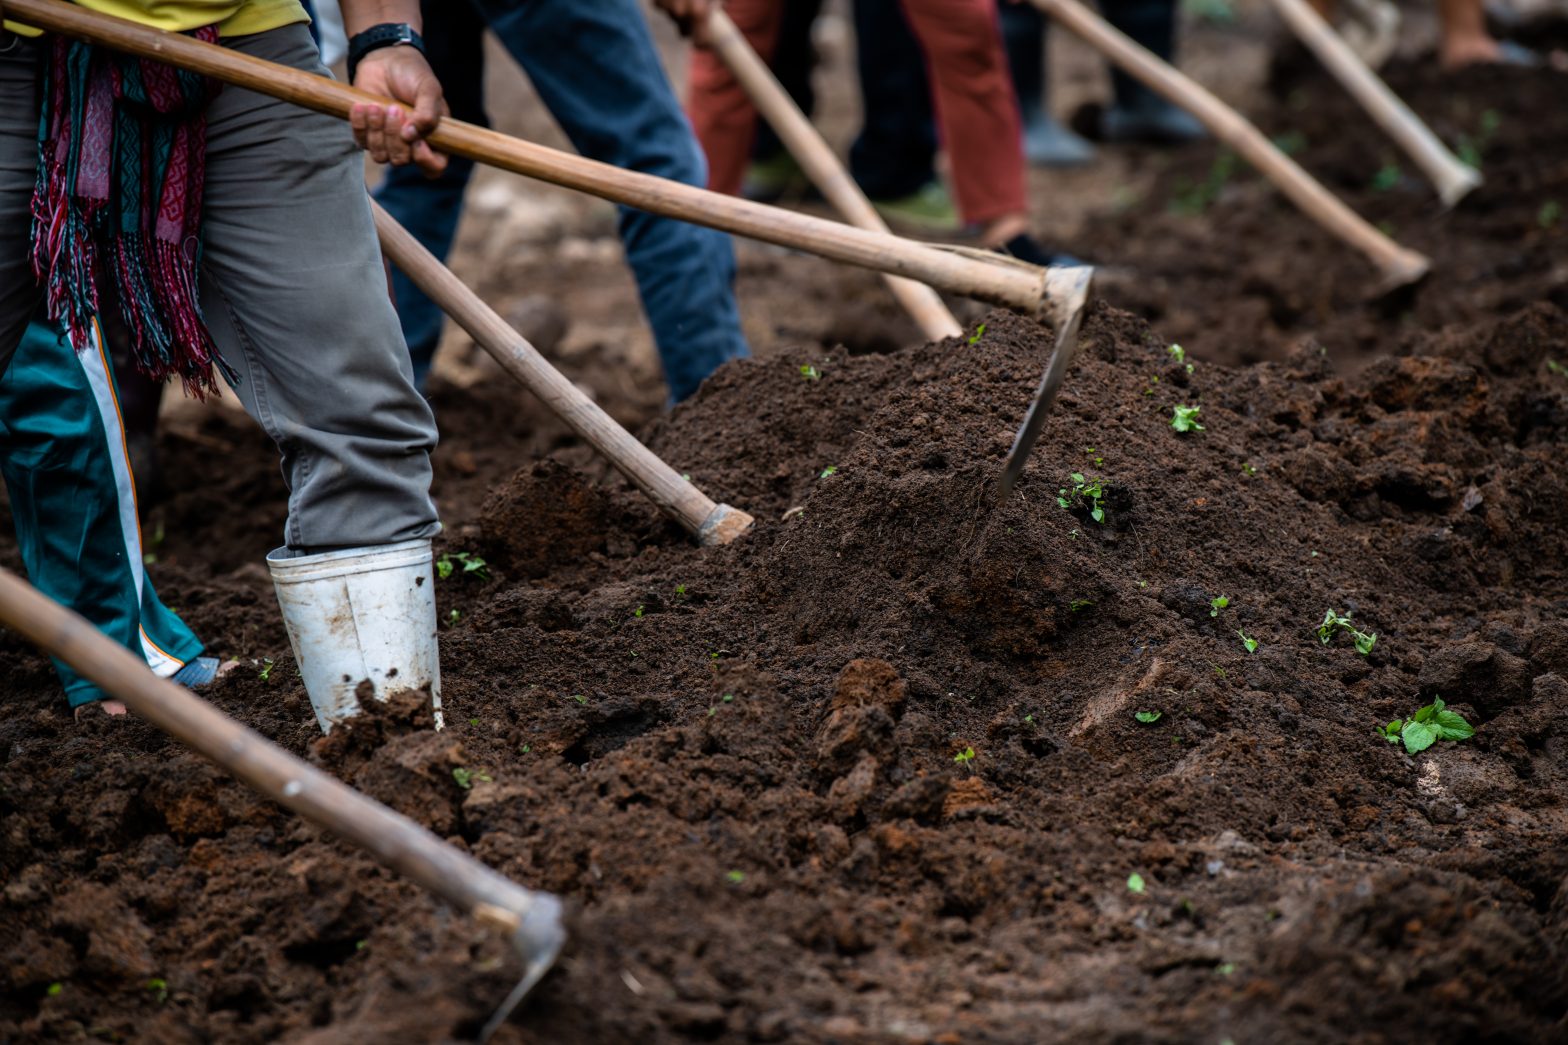 Close-up of a group of people helping to dig the soil with a hoe